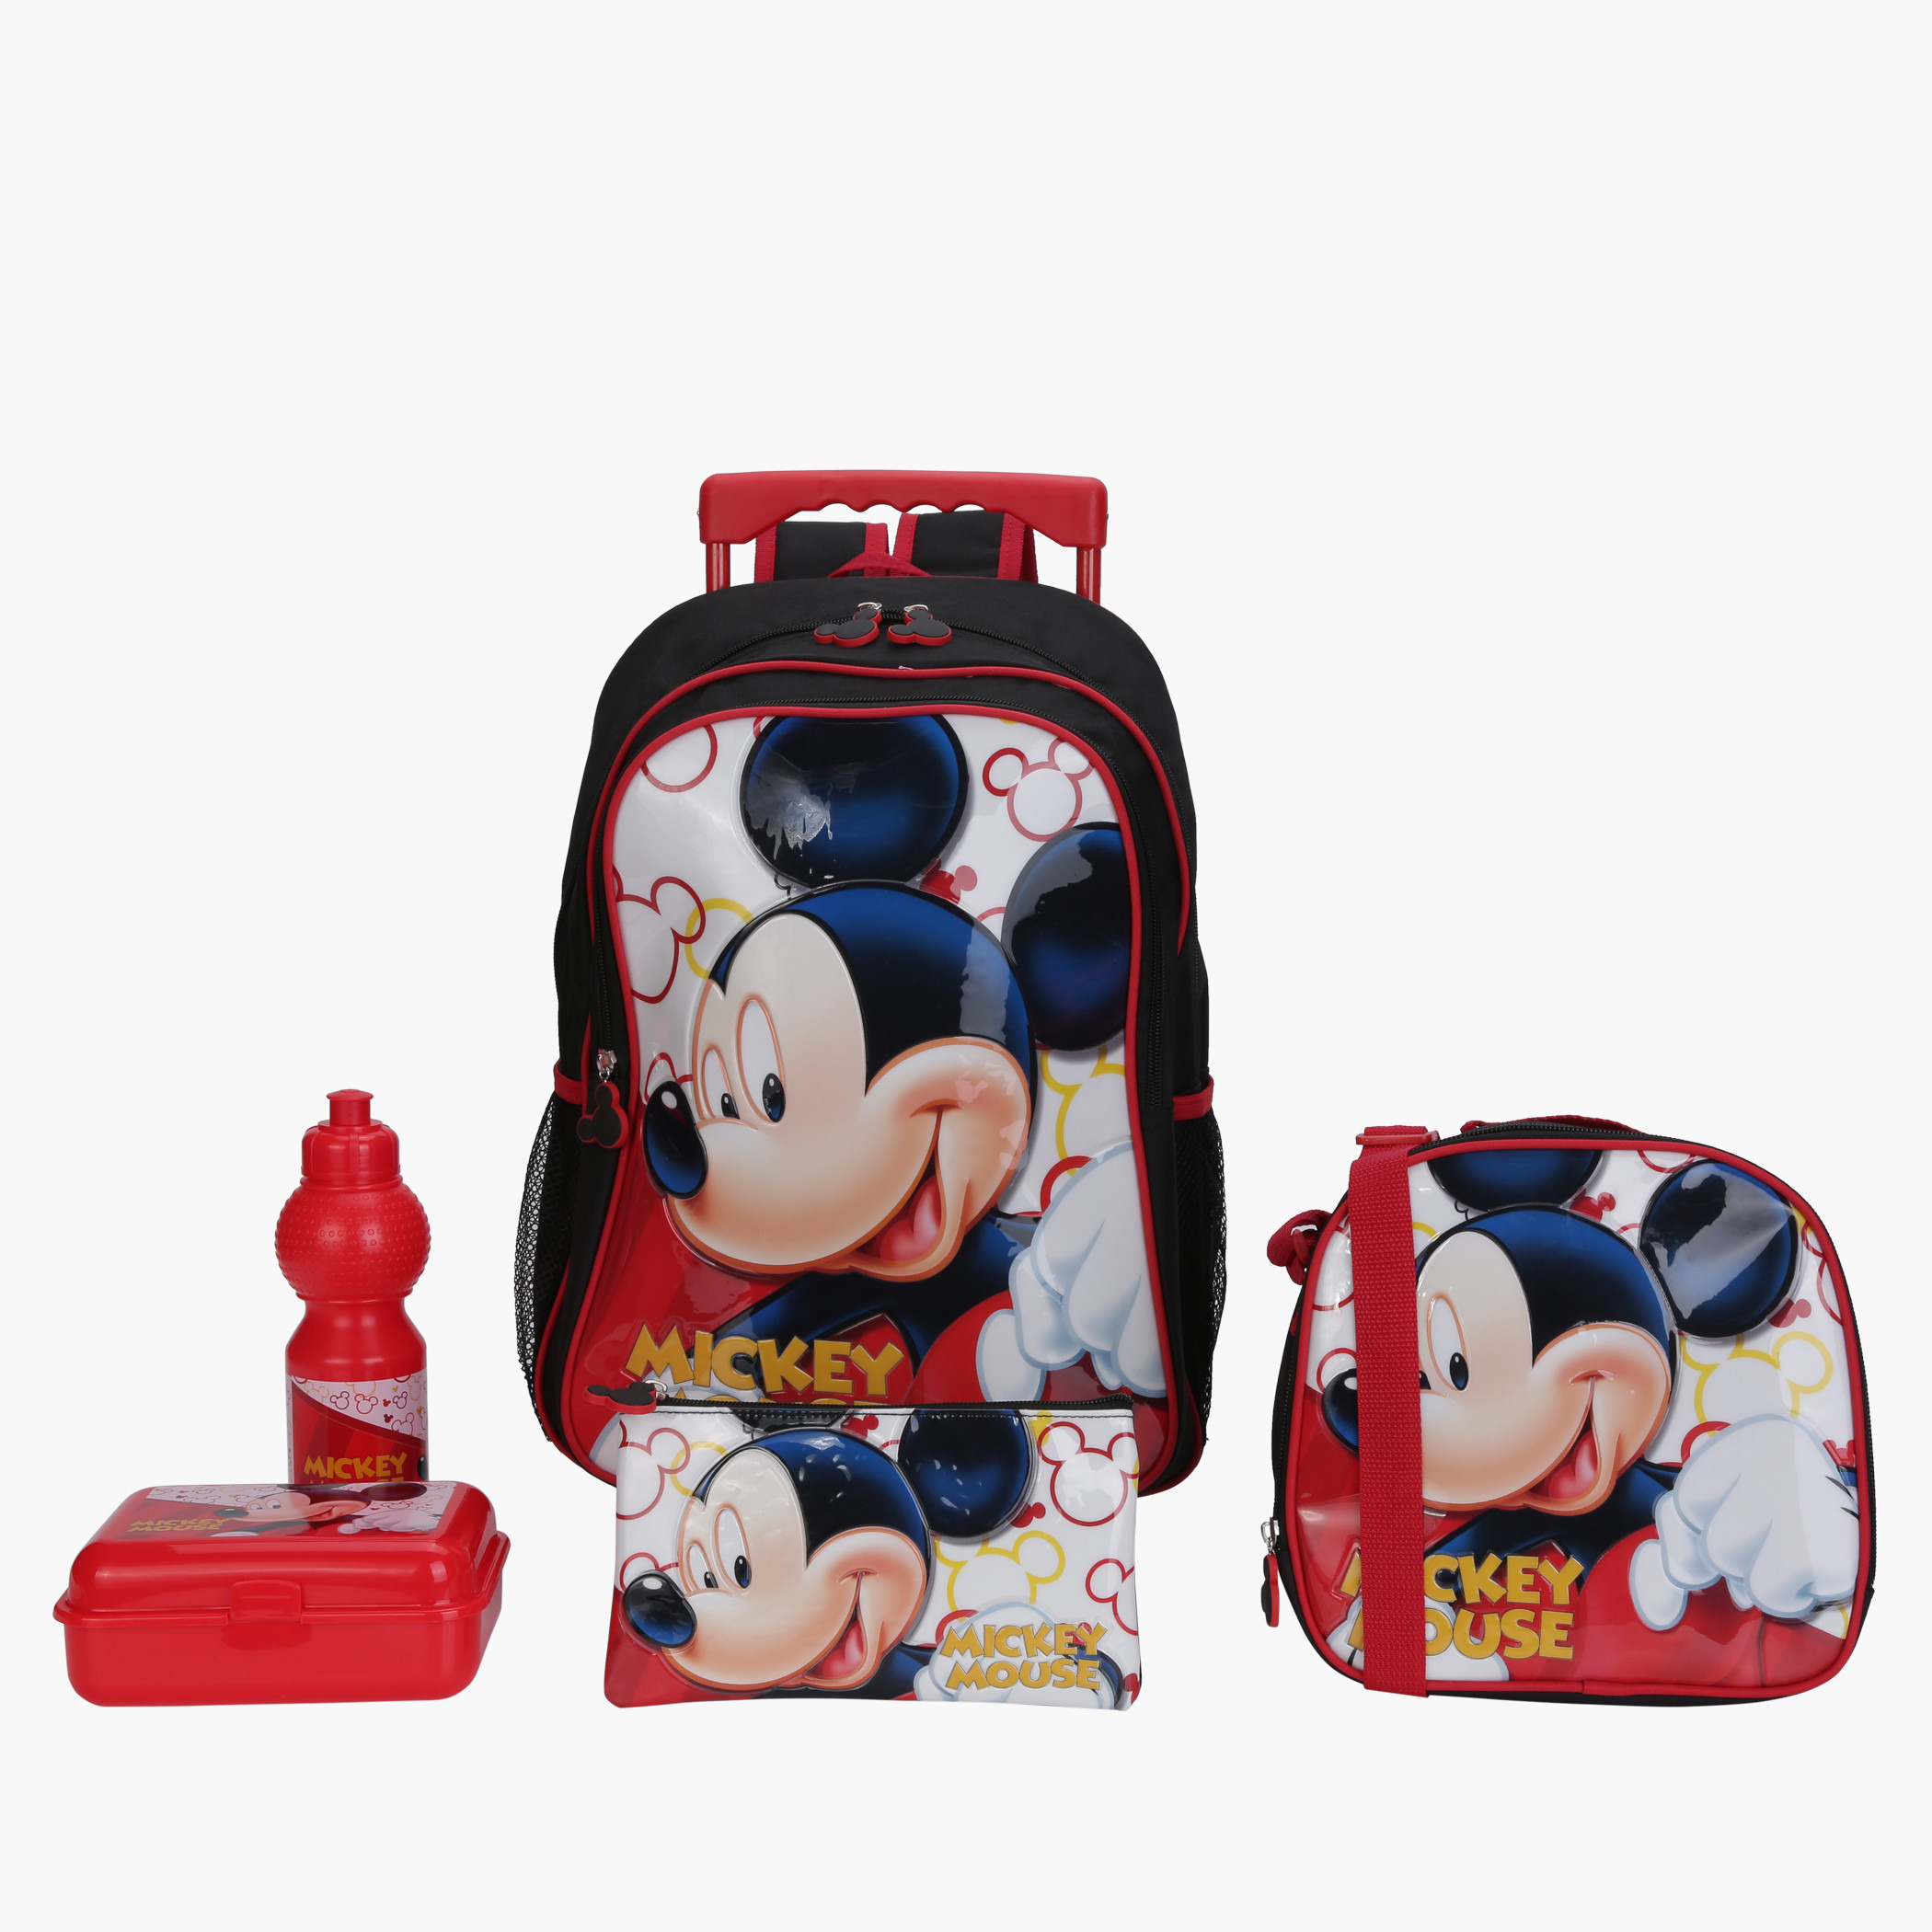 Heart Home Disney Mickey Mouse Print 14 inch Waterproof Polyster School Bag/Backpack  for Kids (Black)- HEART7399 : Amazon.in: Bags, Wallets and Luggage